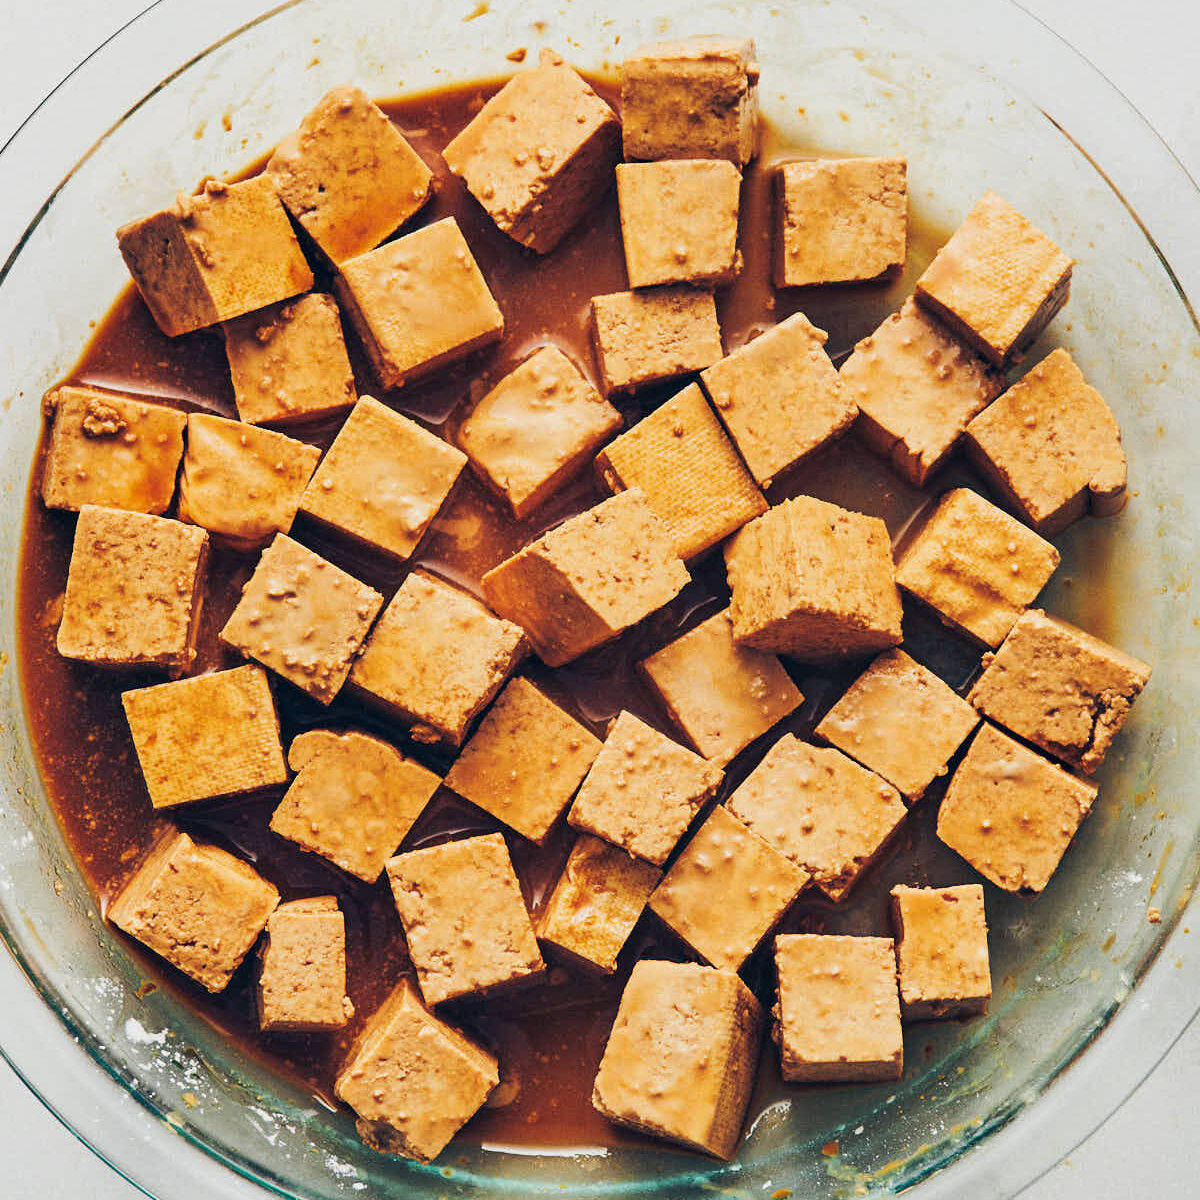 Cubed tofu sitting in a shallow glass dish of tamari to marinate